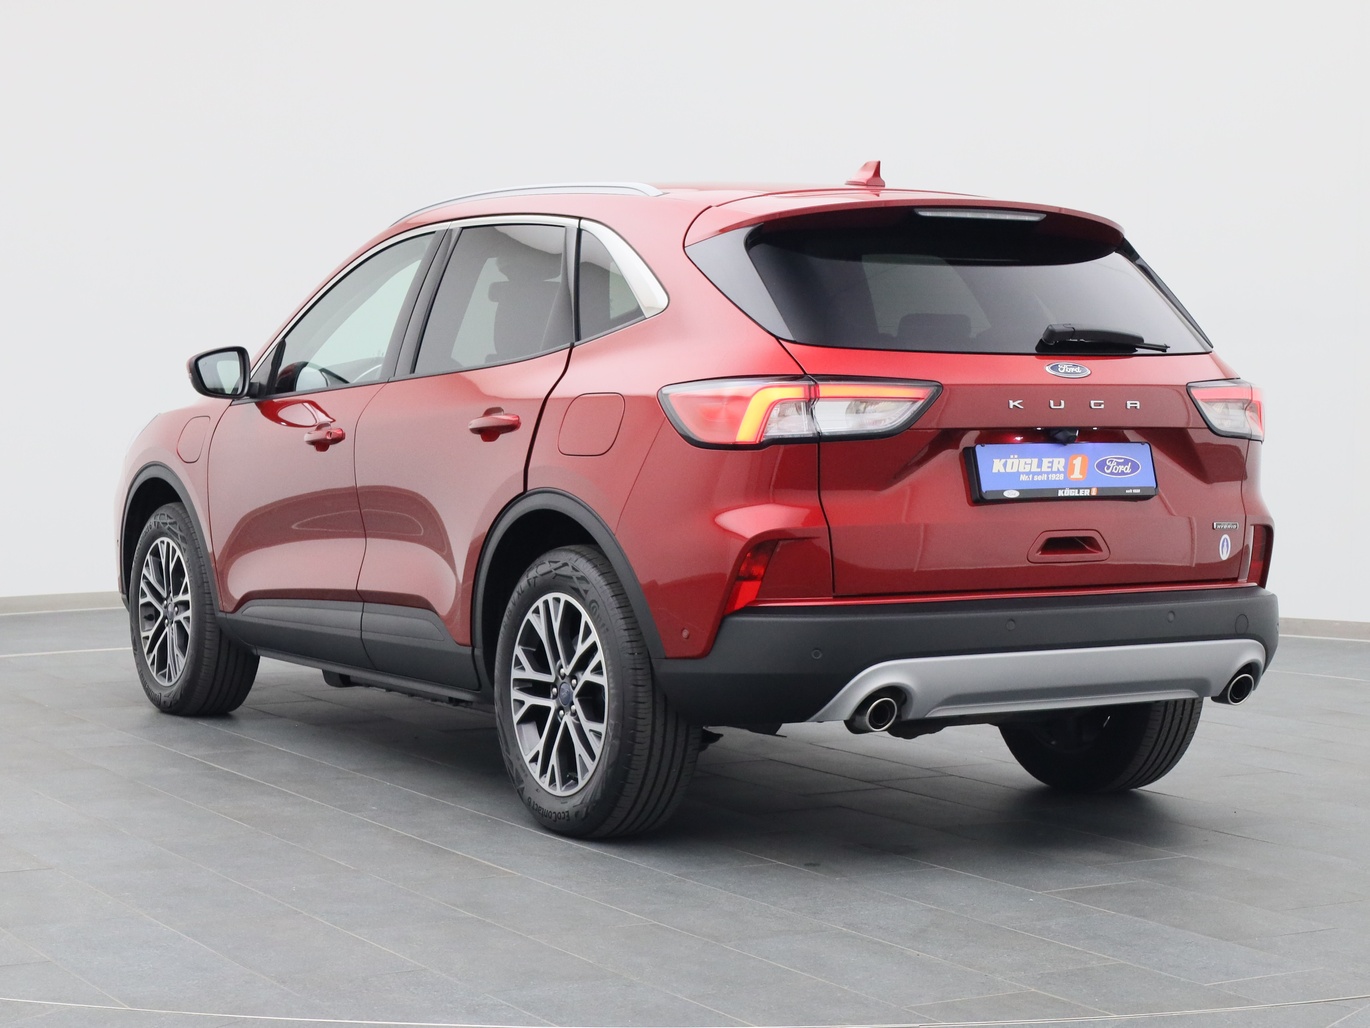  Ford Kuga Titanium X 225PS Plug-in-Hybrid Aut. in Lucid Rot 